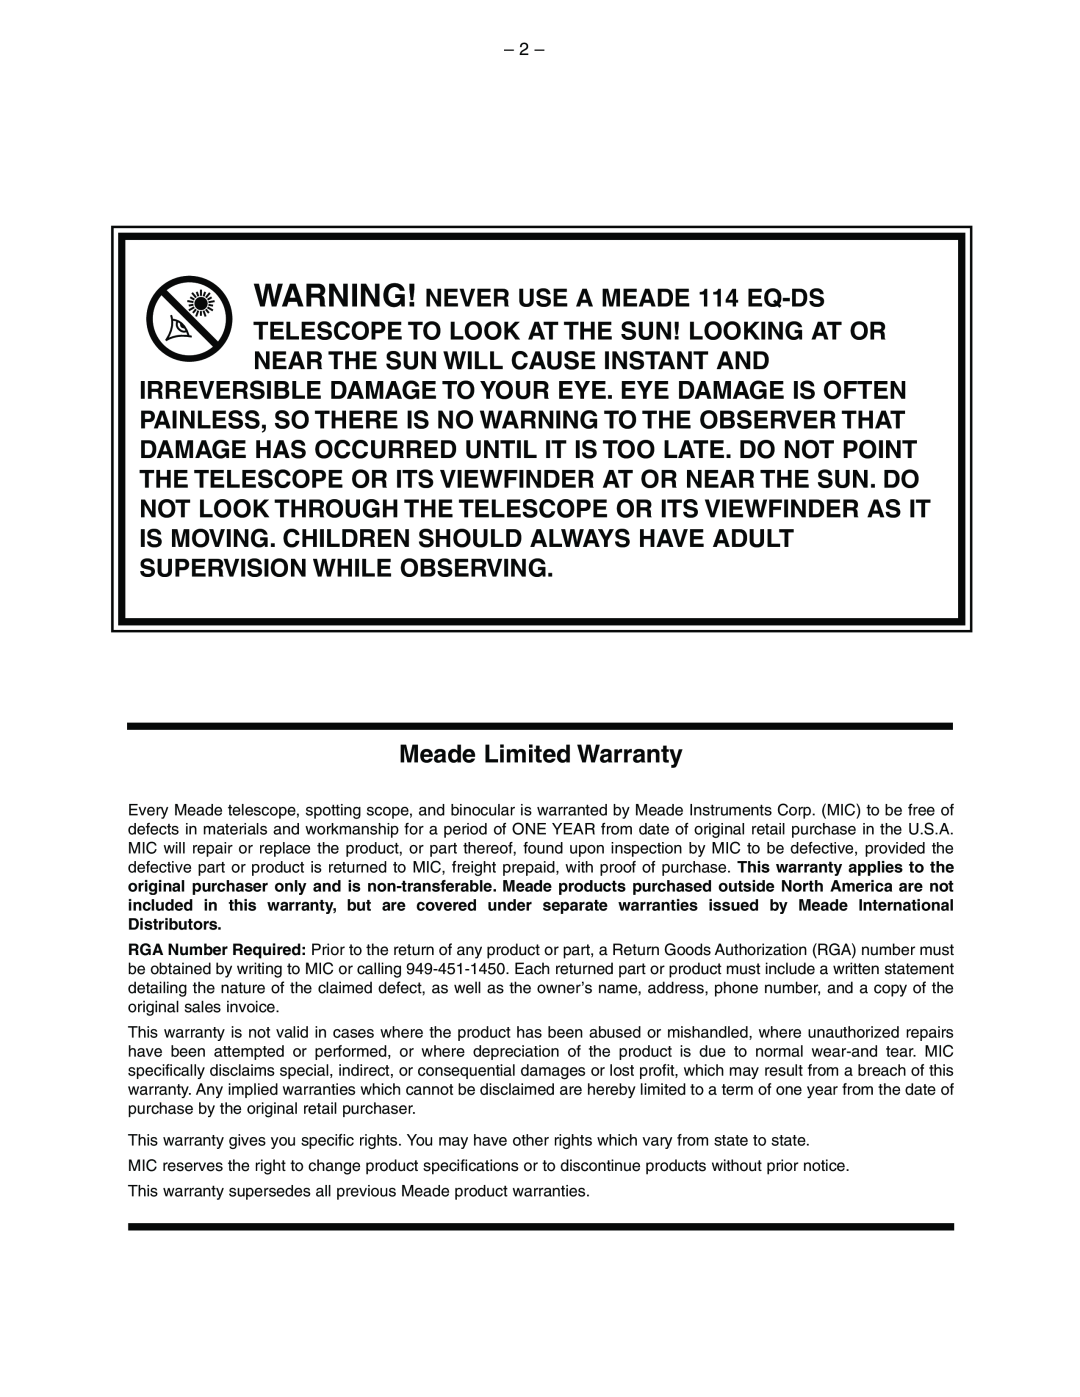 Meade instruction manual WARNING! NEVER USE A MEADE 114 EQ-DS, Meade Limited Warranty 